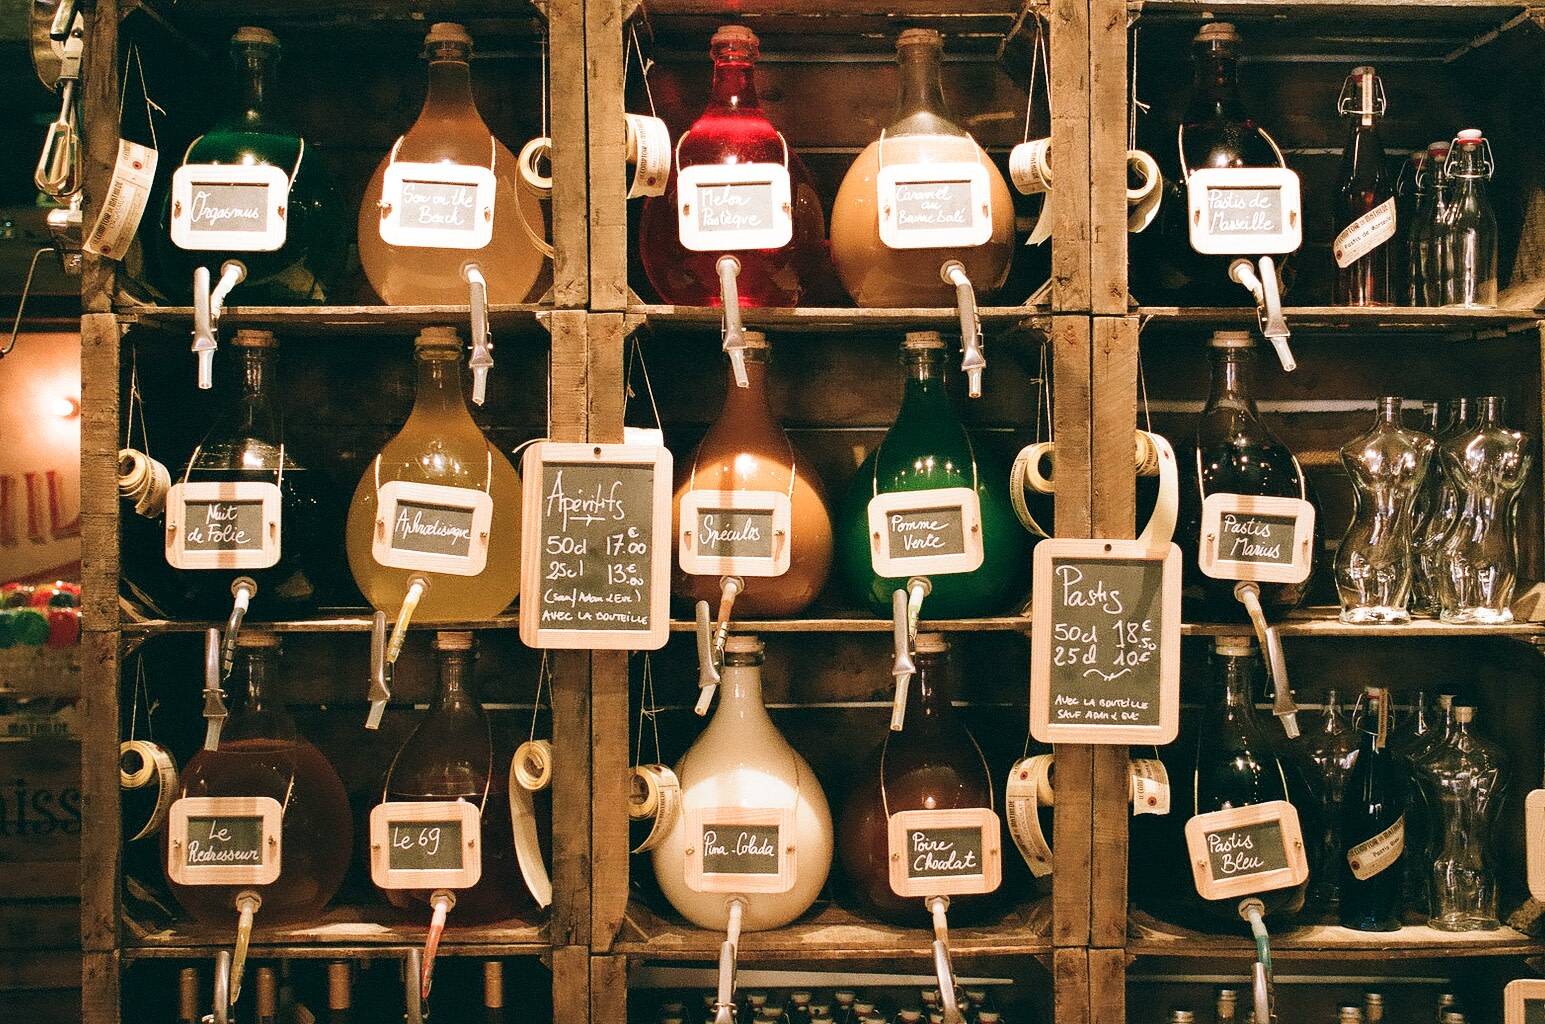 wide range of different coloured alcoholic drinks displayed in identical looking vase like glass containers that are placed on stacked wooden crates